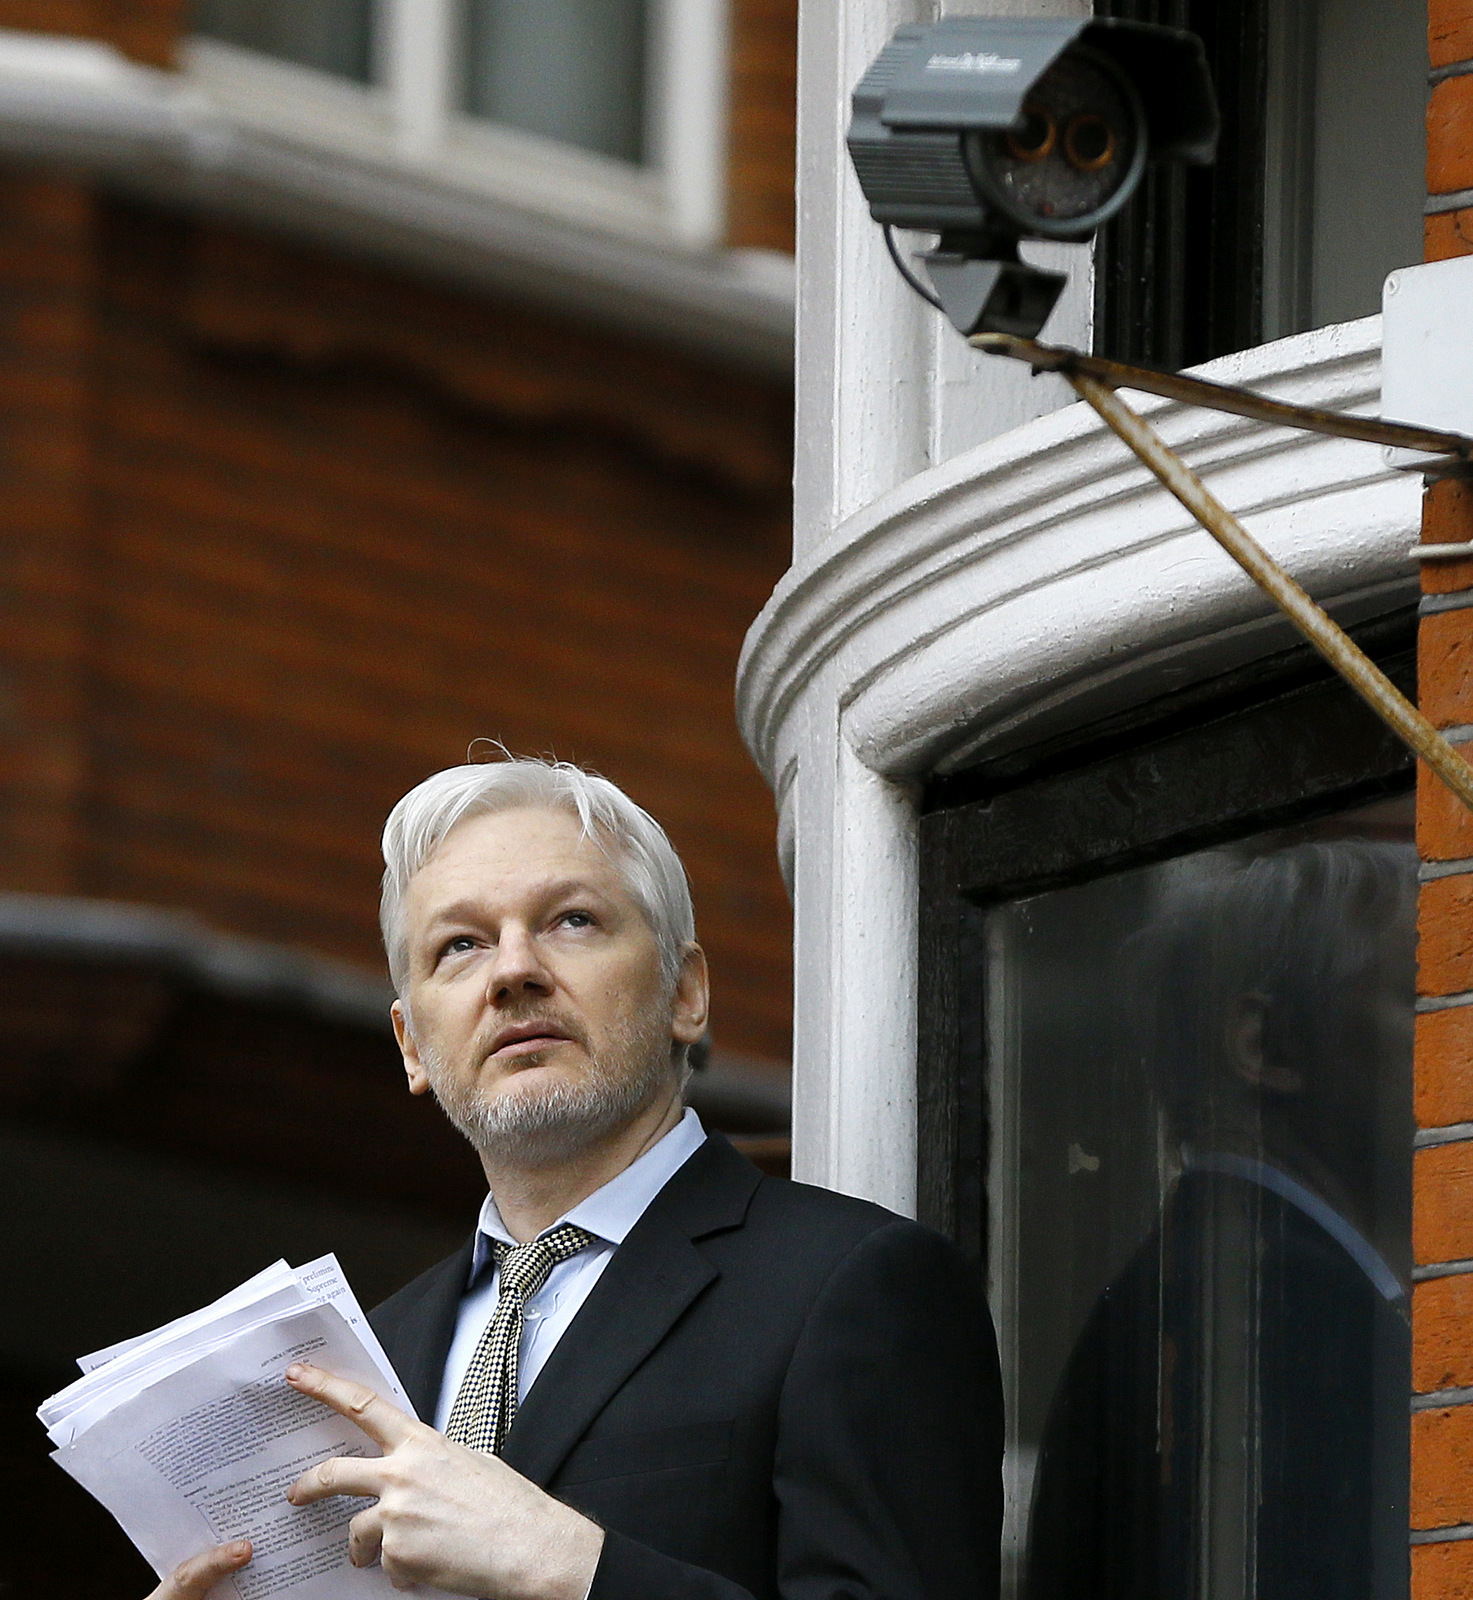 Wikileaks founder Julian Assange looks up as he speaks on the balcony of the Ecuadorean Embassy in London, Friday, Feb. 5, 2016. (AP Photo/Kirsty Wigglesworth)